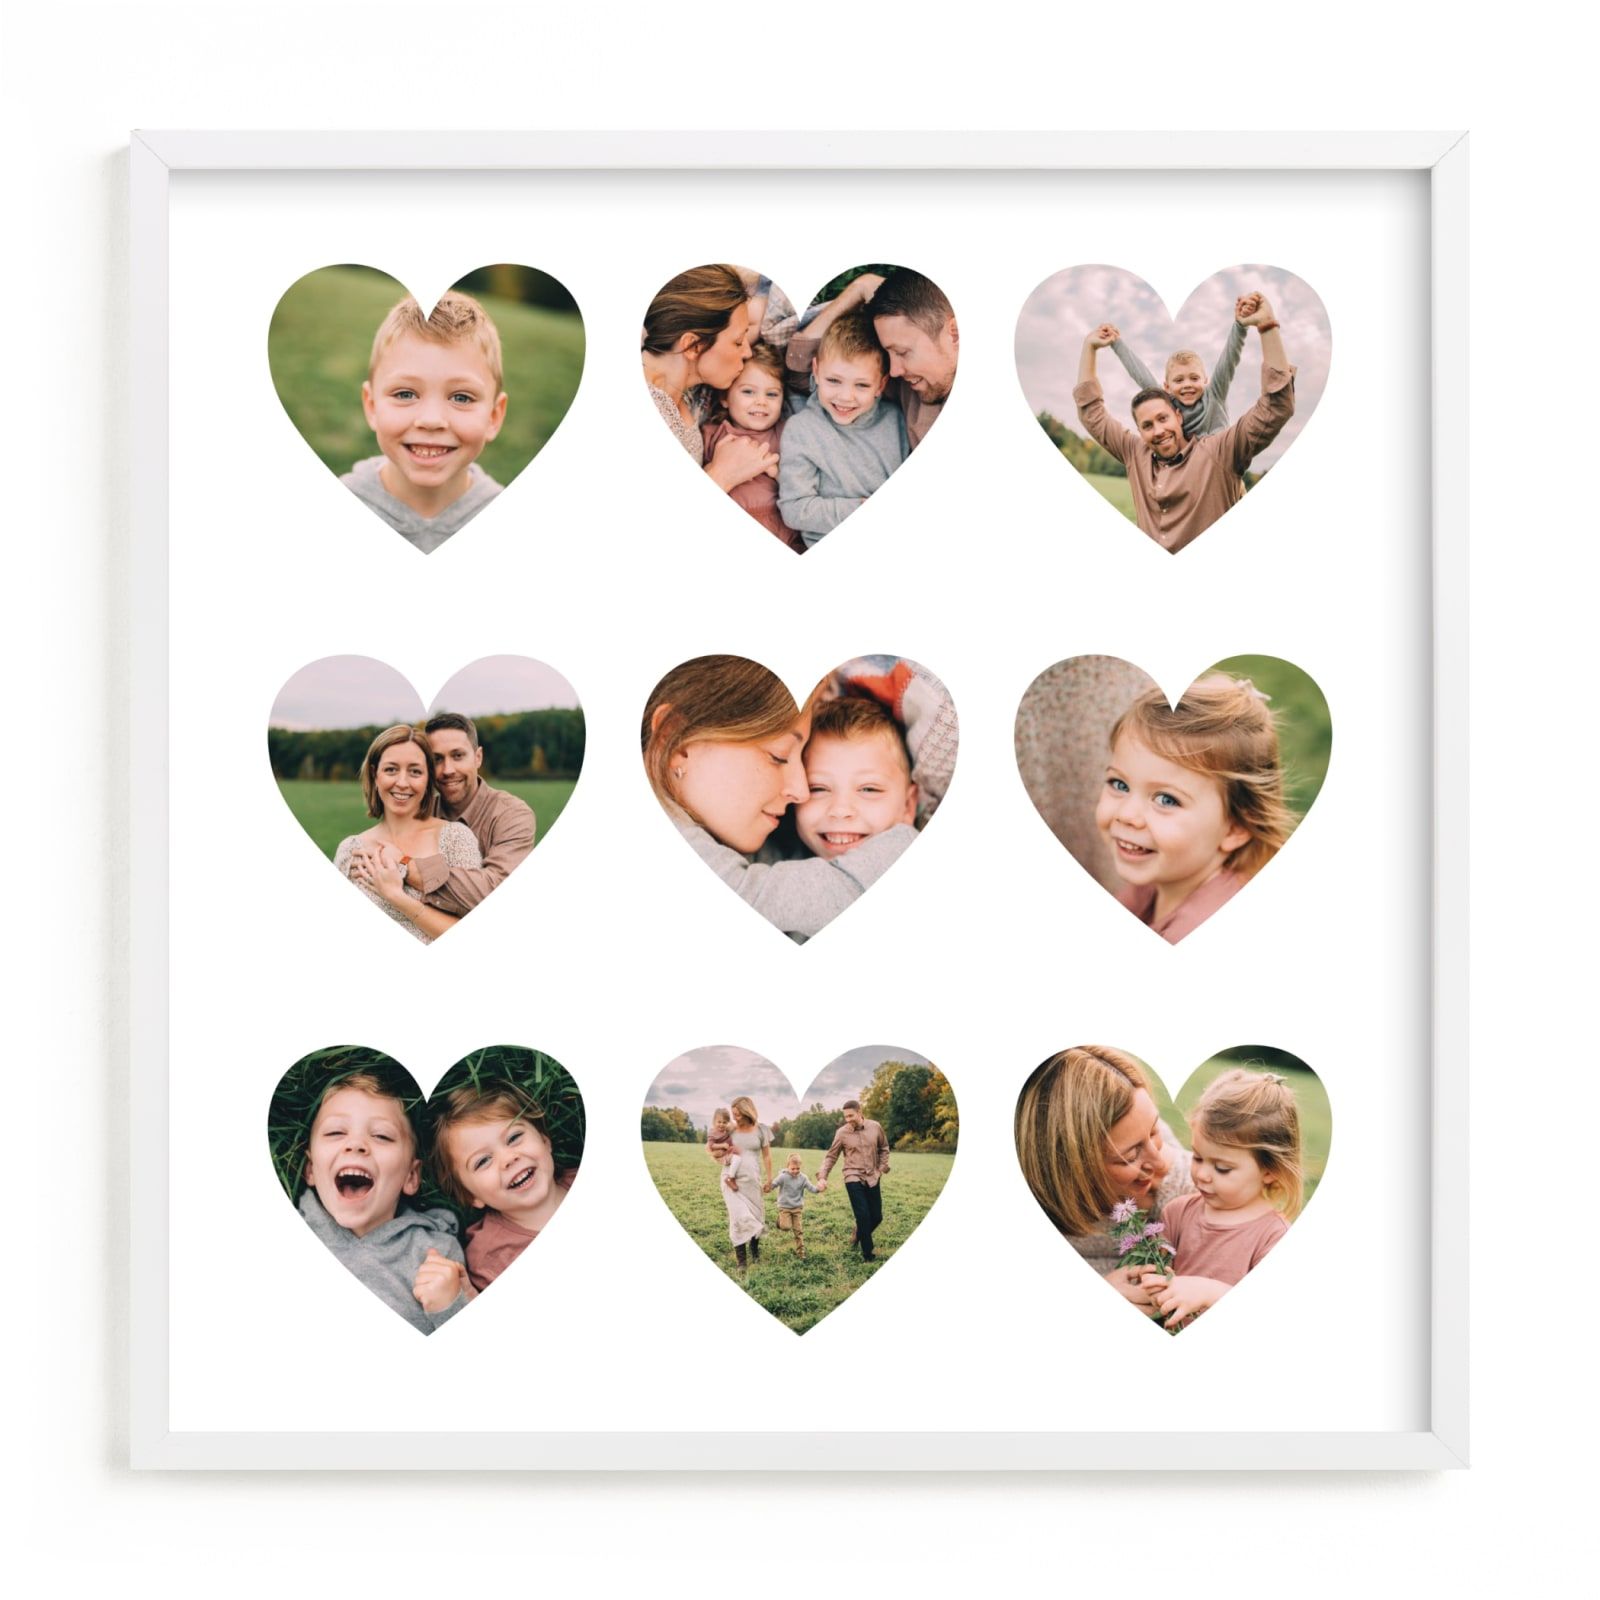 Heart Gallery - Square | Minted